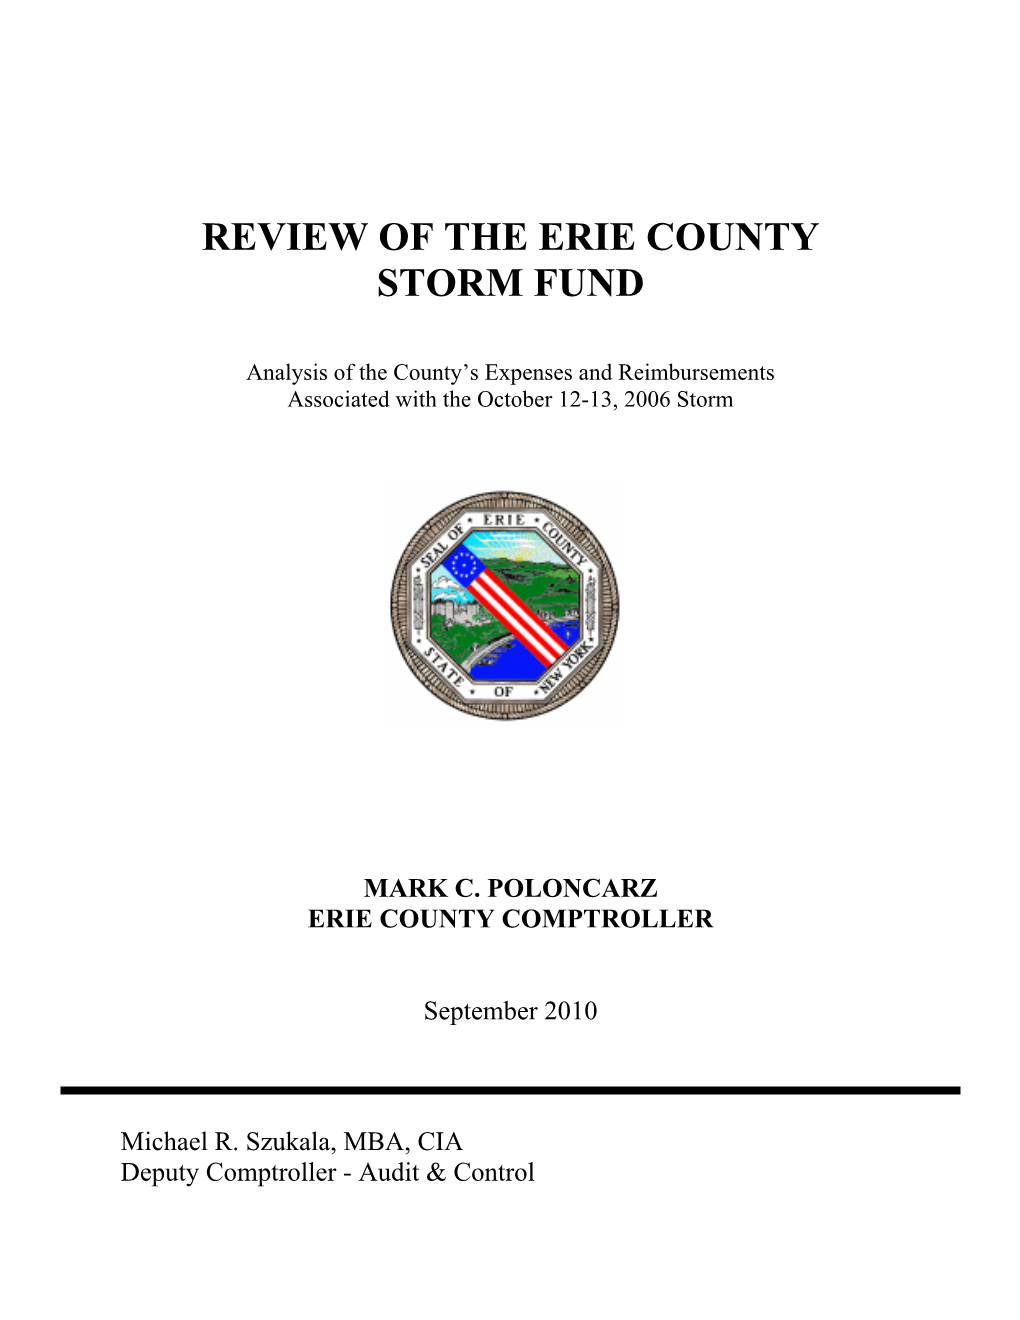 Review of the Erie County Storm Fund